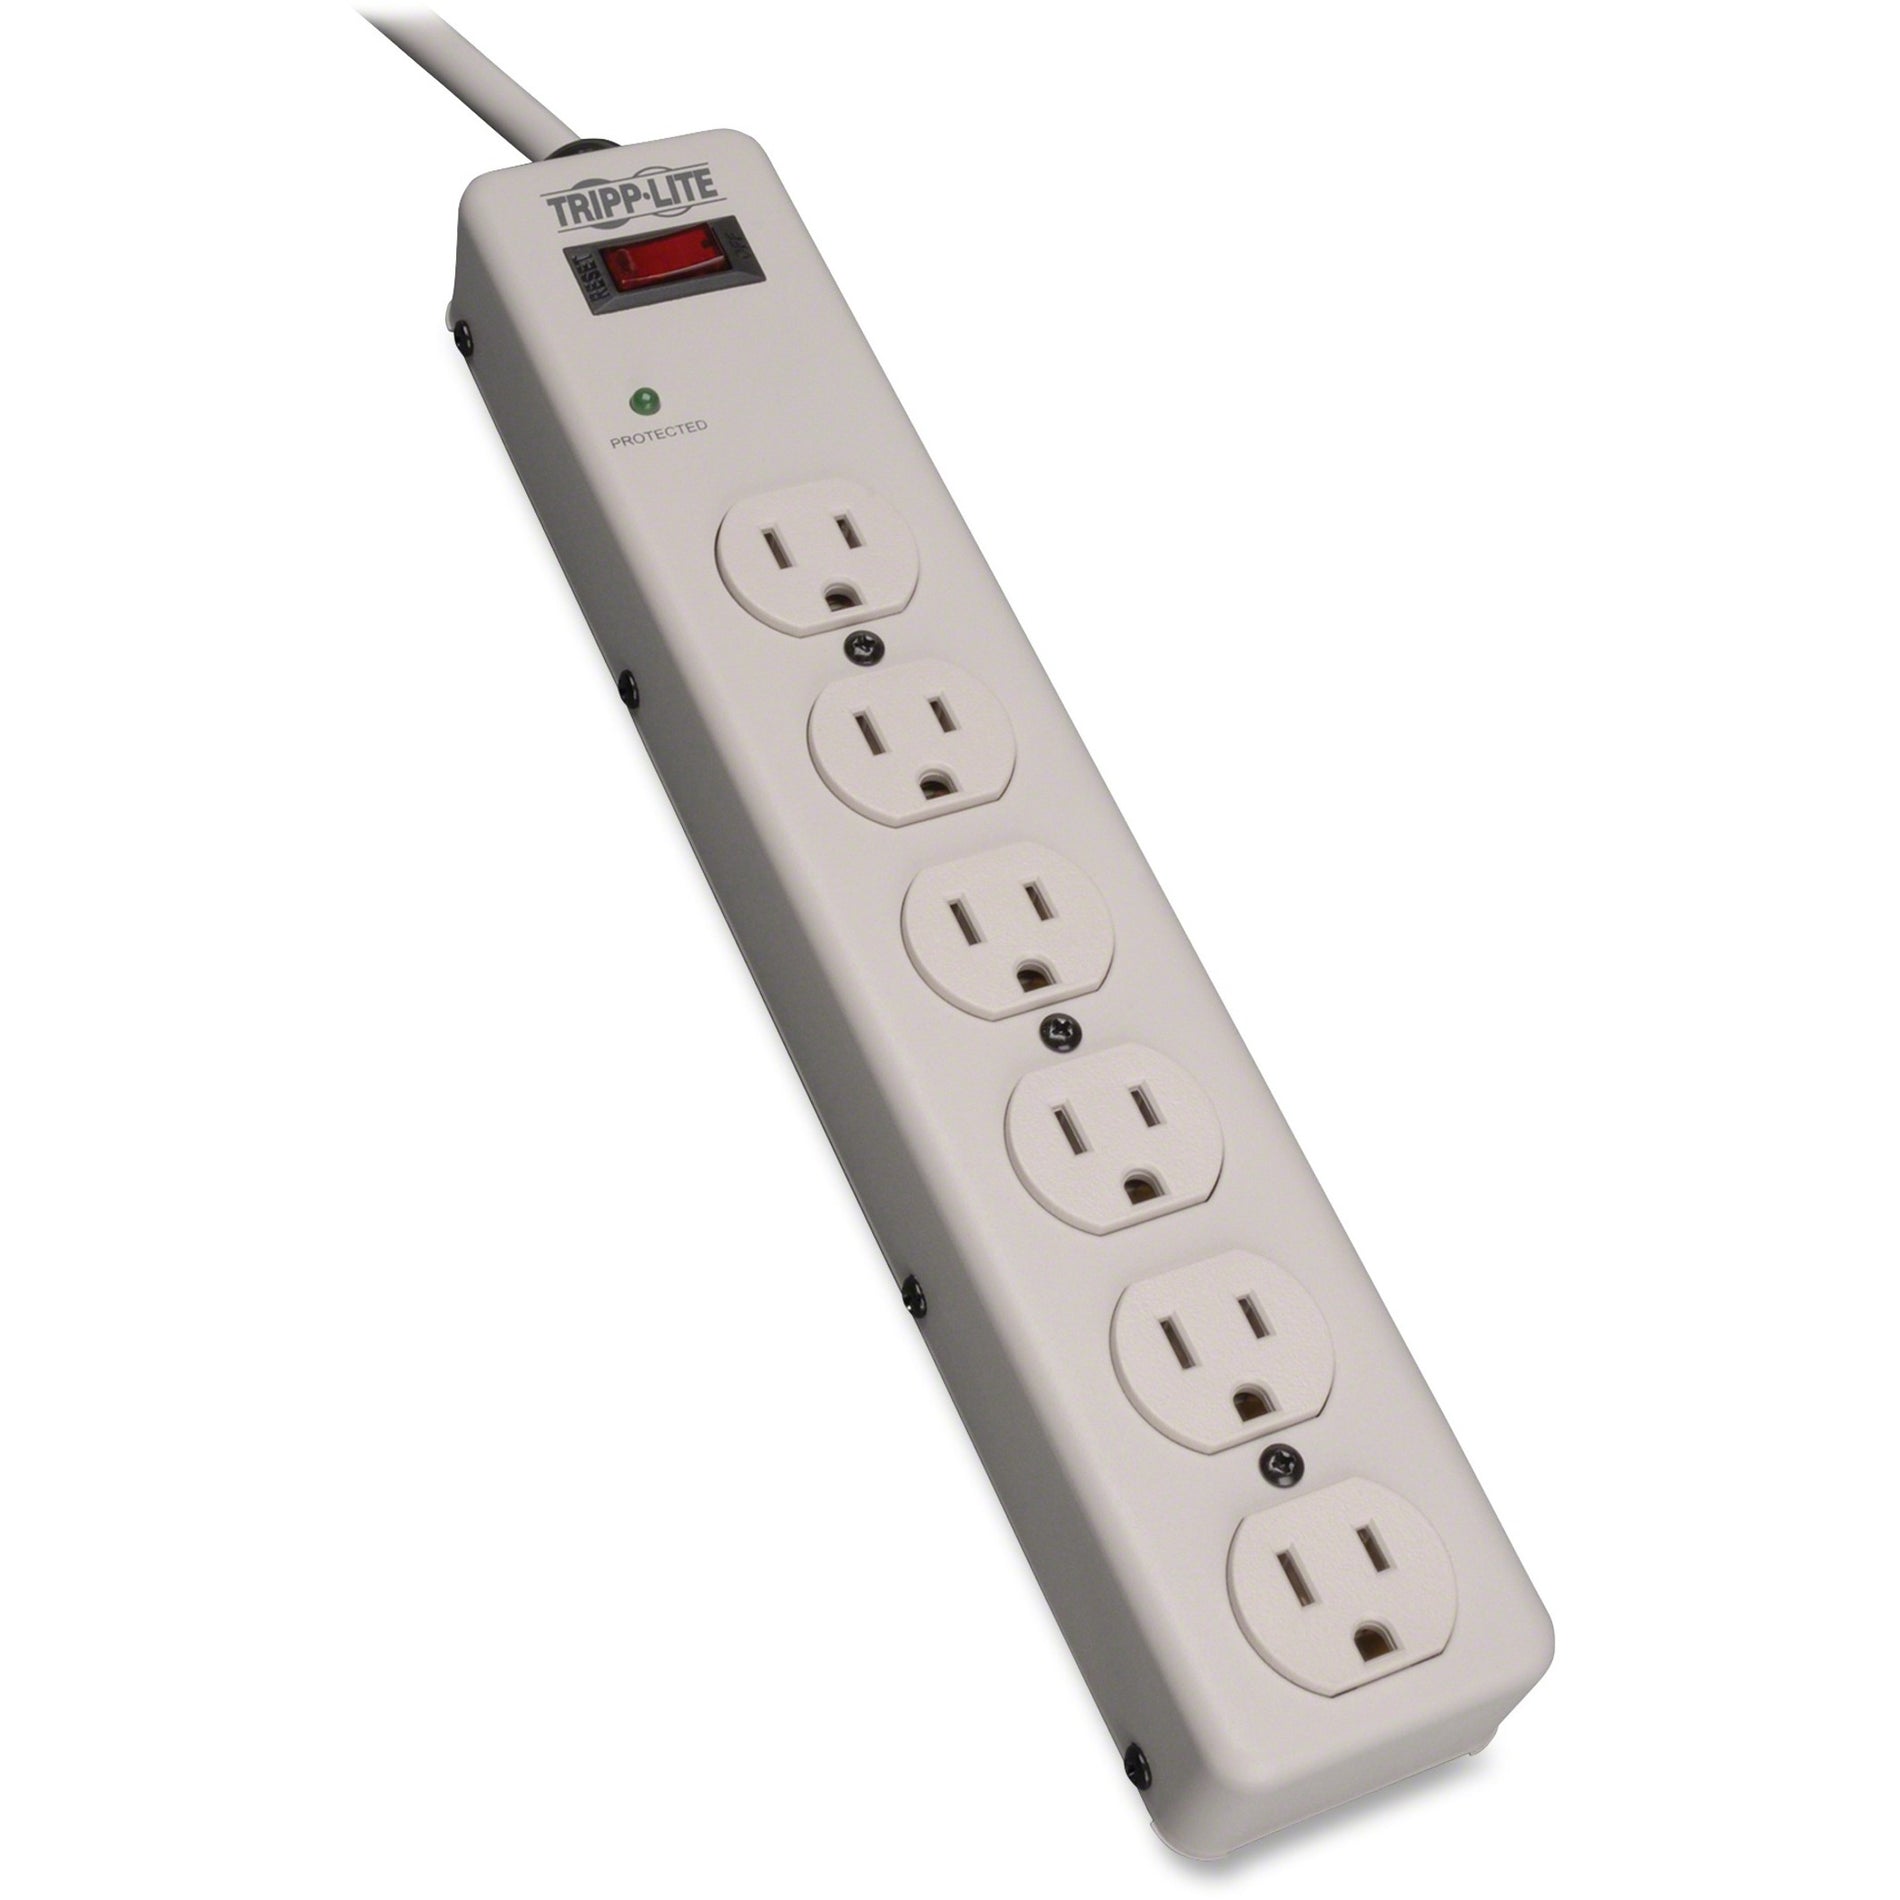 Tripp Lite TLM606HJ Protect It! 6-Outlet Surge Suppressor, 1340 Joules, 6ft Cord